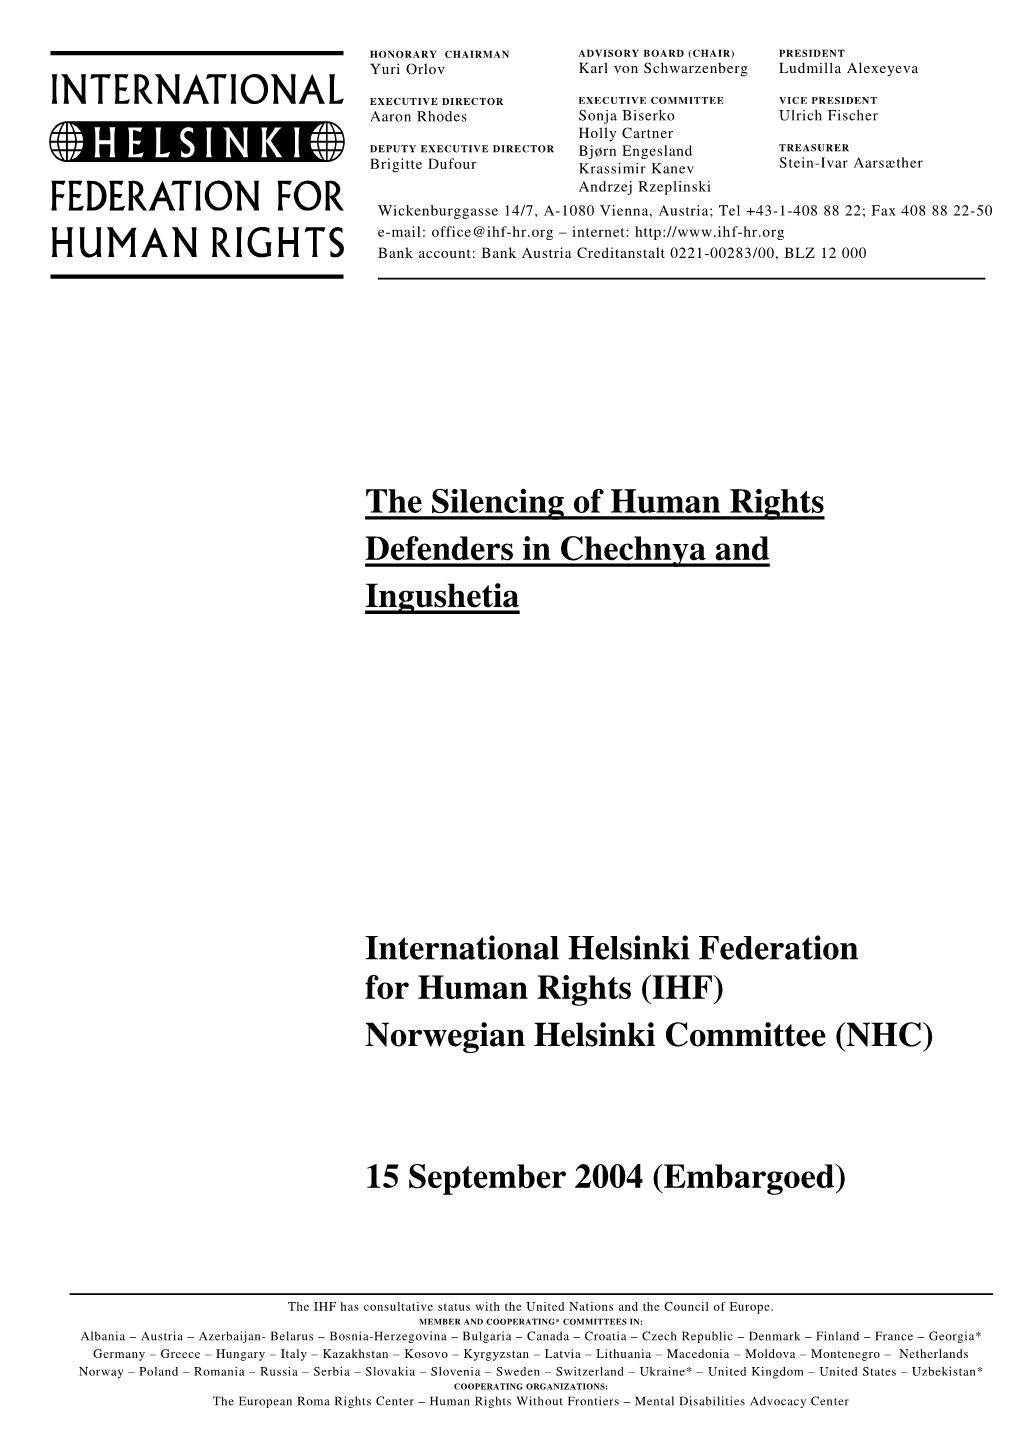 The Silencing of Human Rights Defenders in Chechnya and Ingushetia